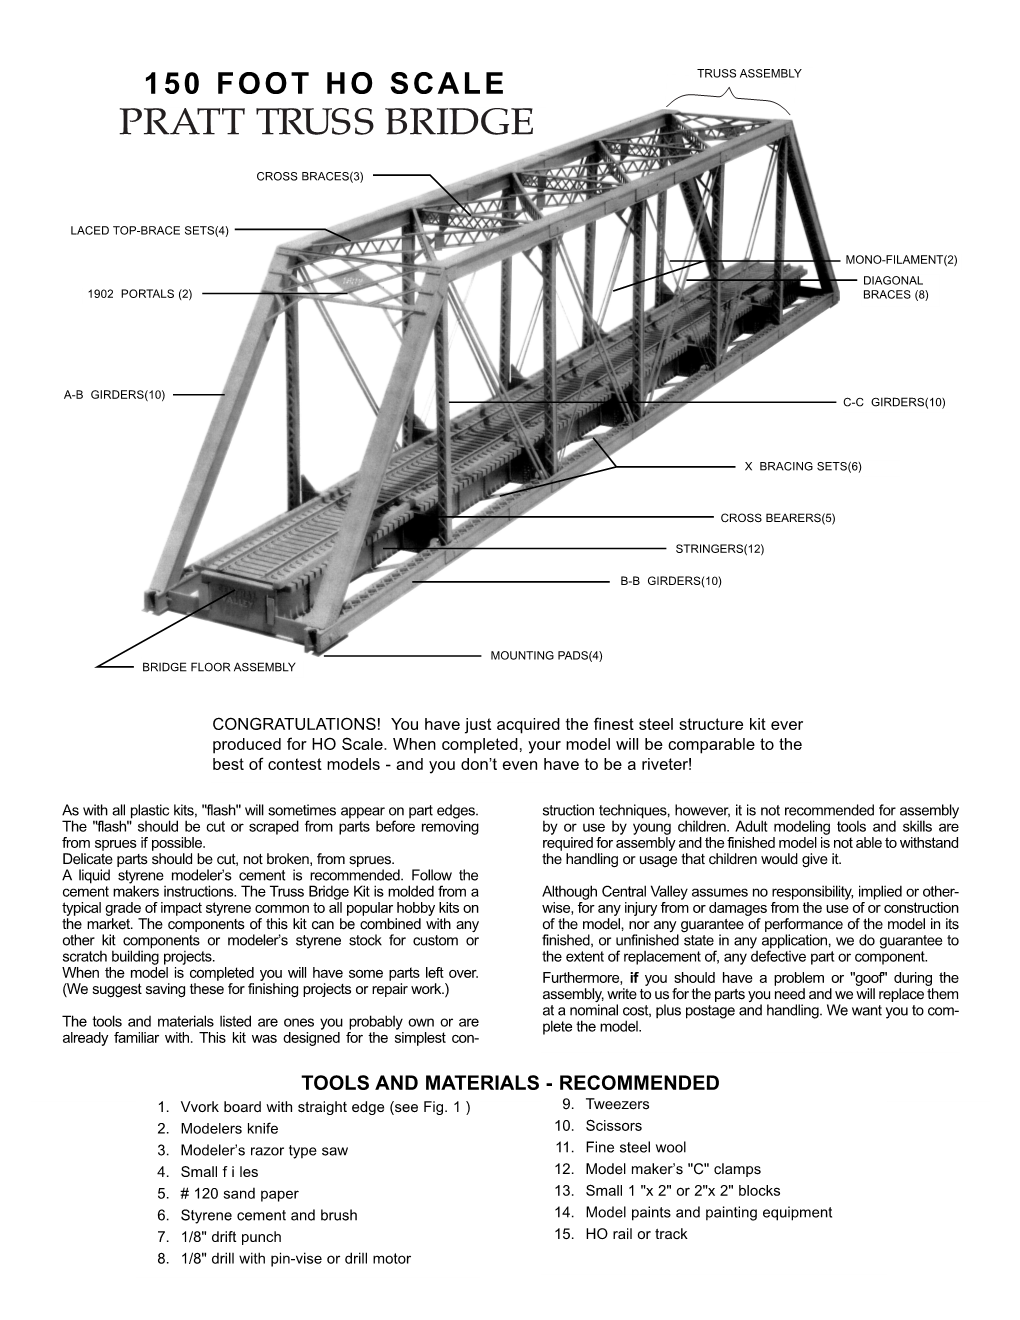 150 Foot Ho Scale Truss Assembly